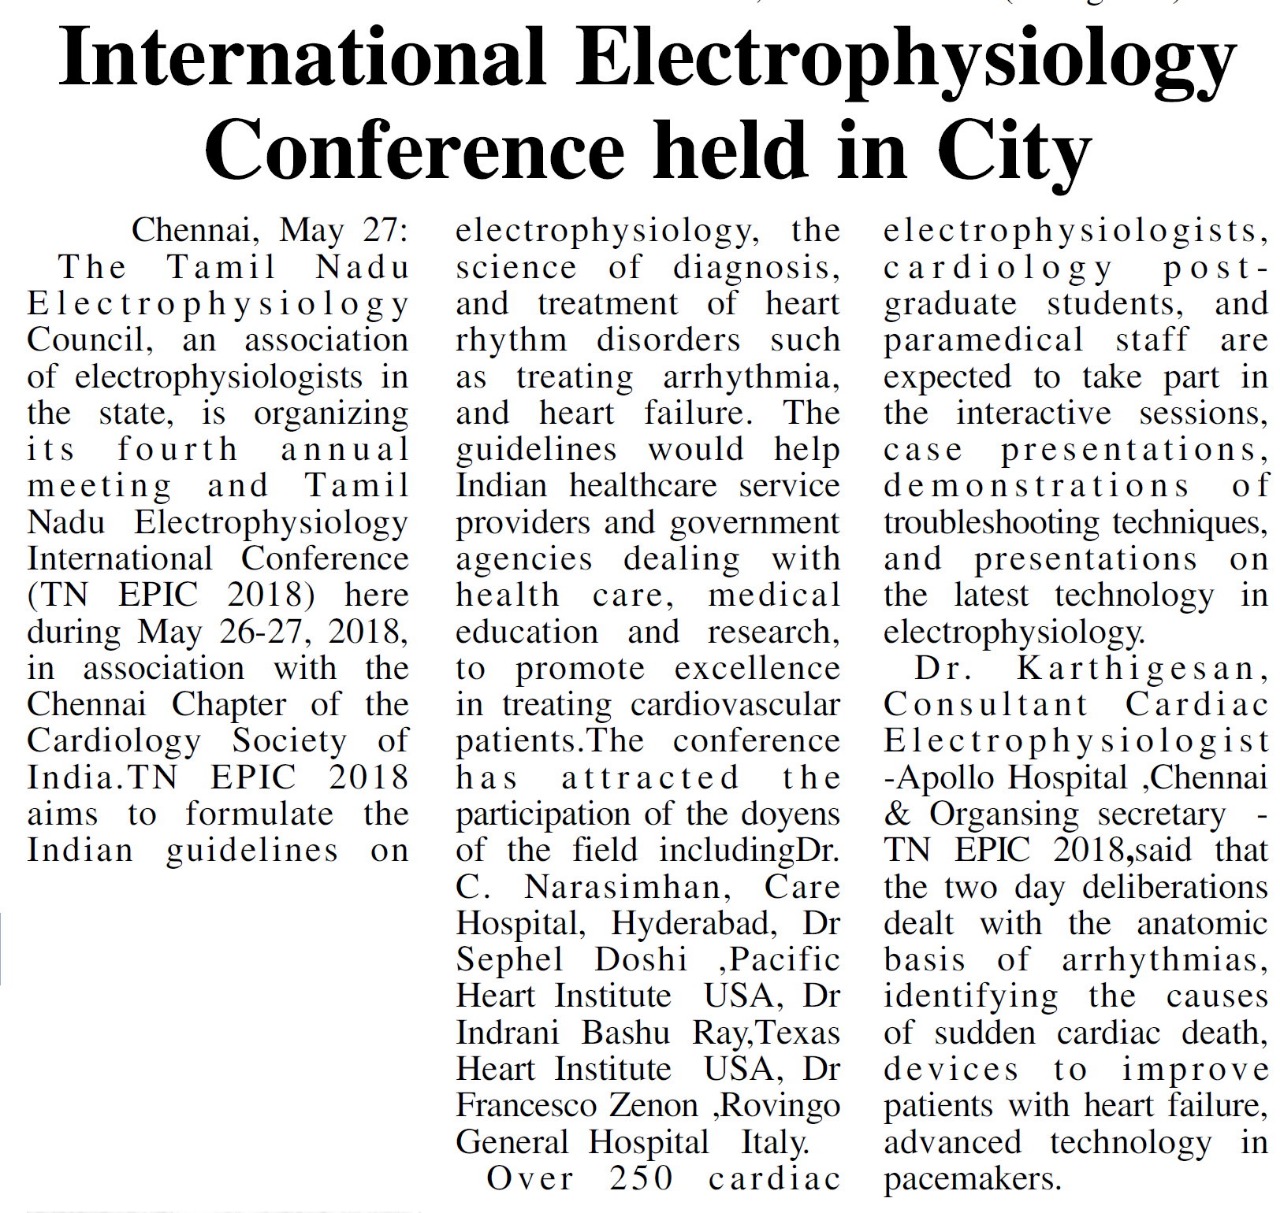 News clipping on 'International Electrophysiology Conference'.